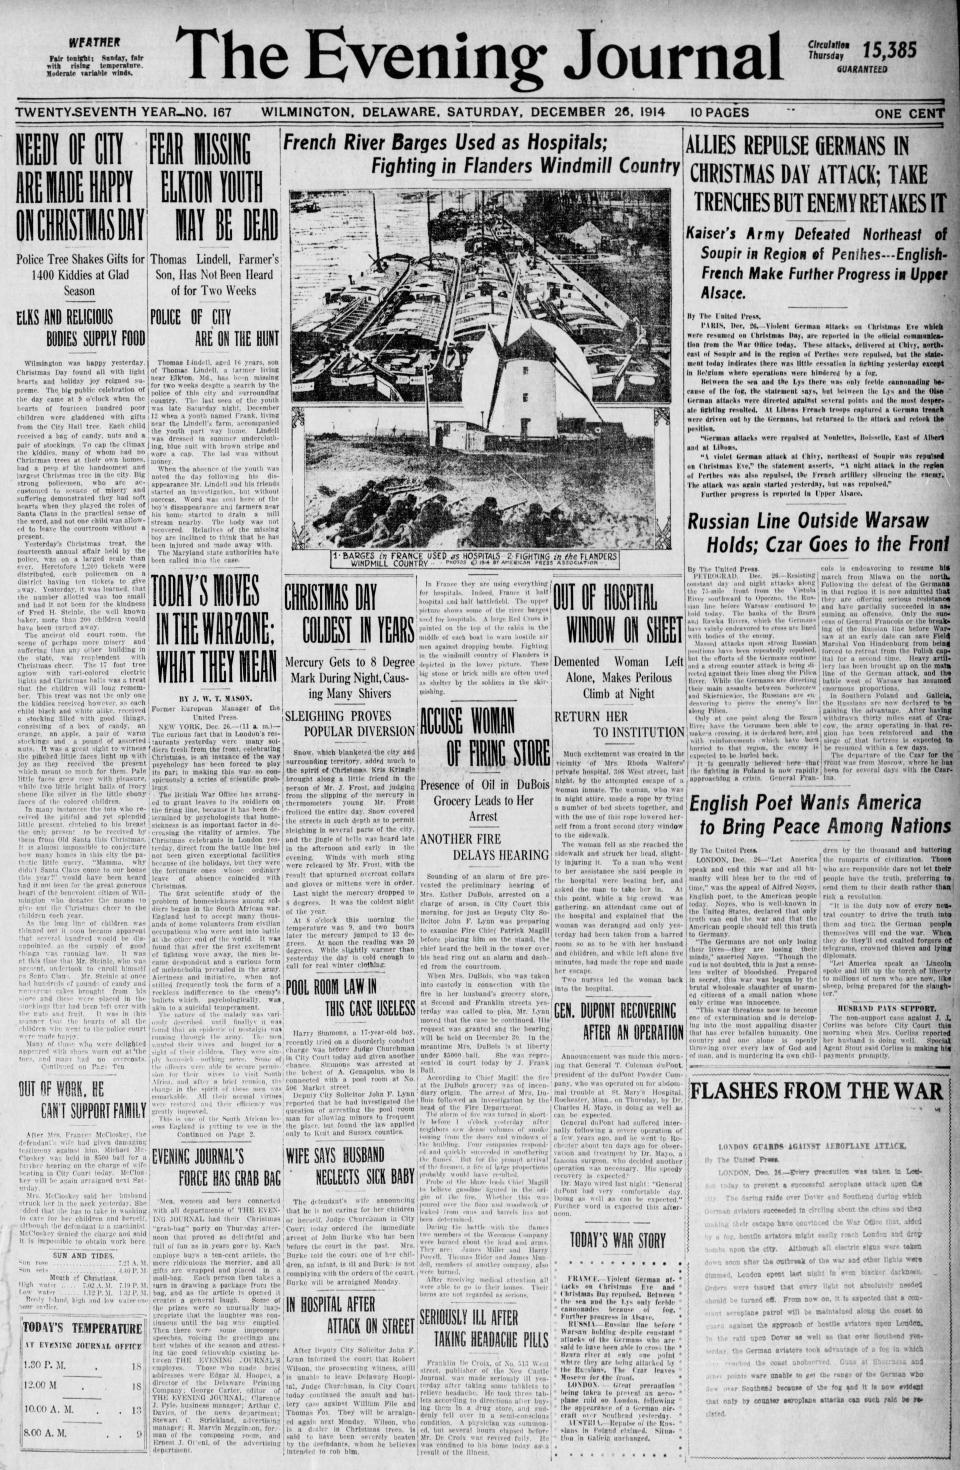 Front page of The Evening Journal from Dec. 26, 1914.